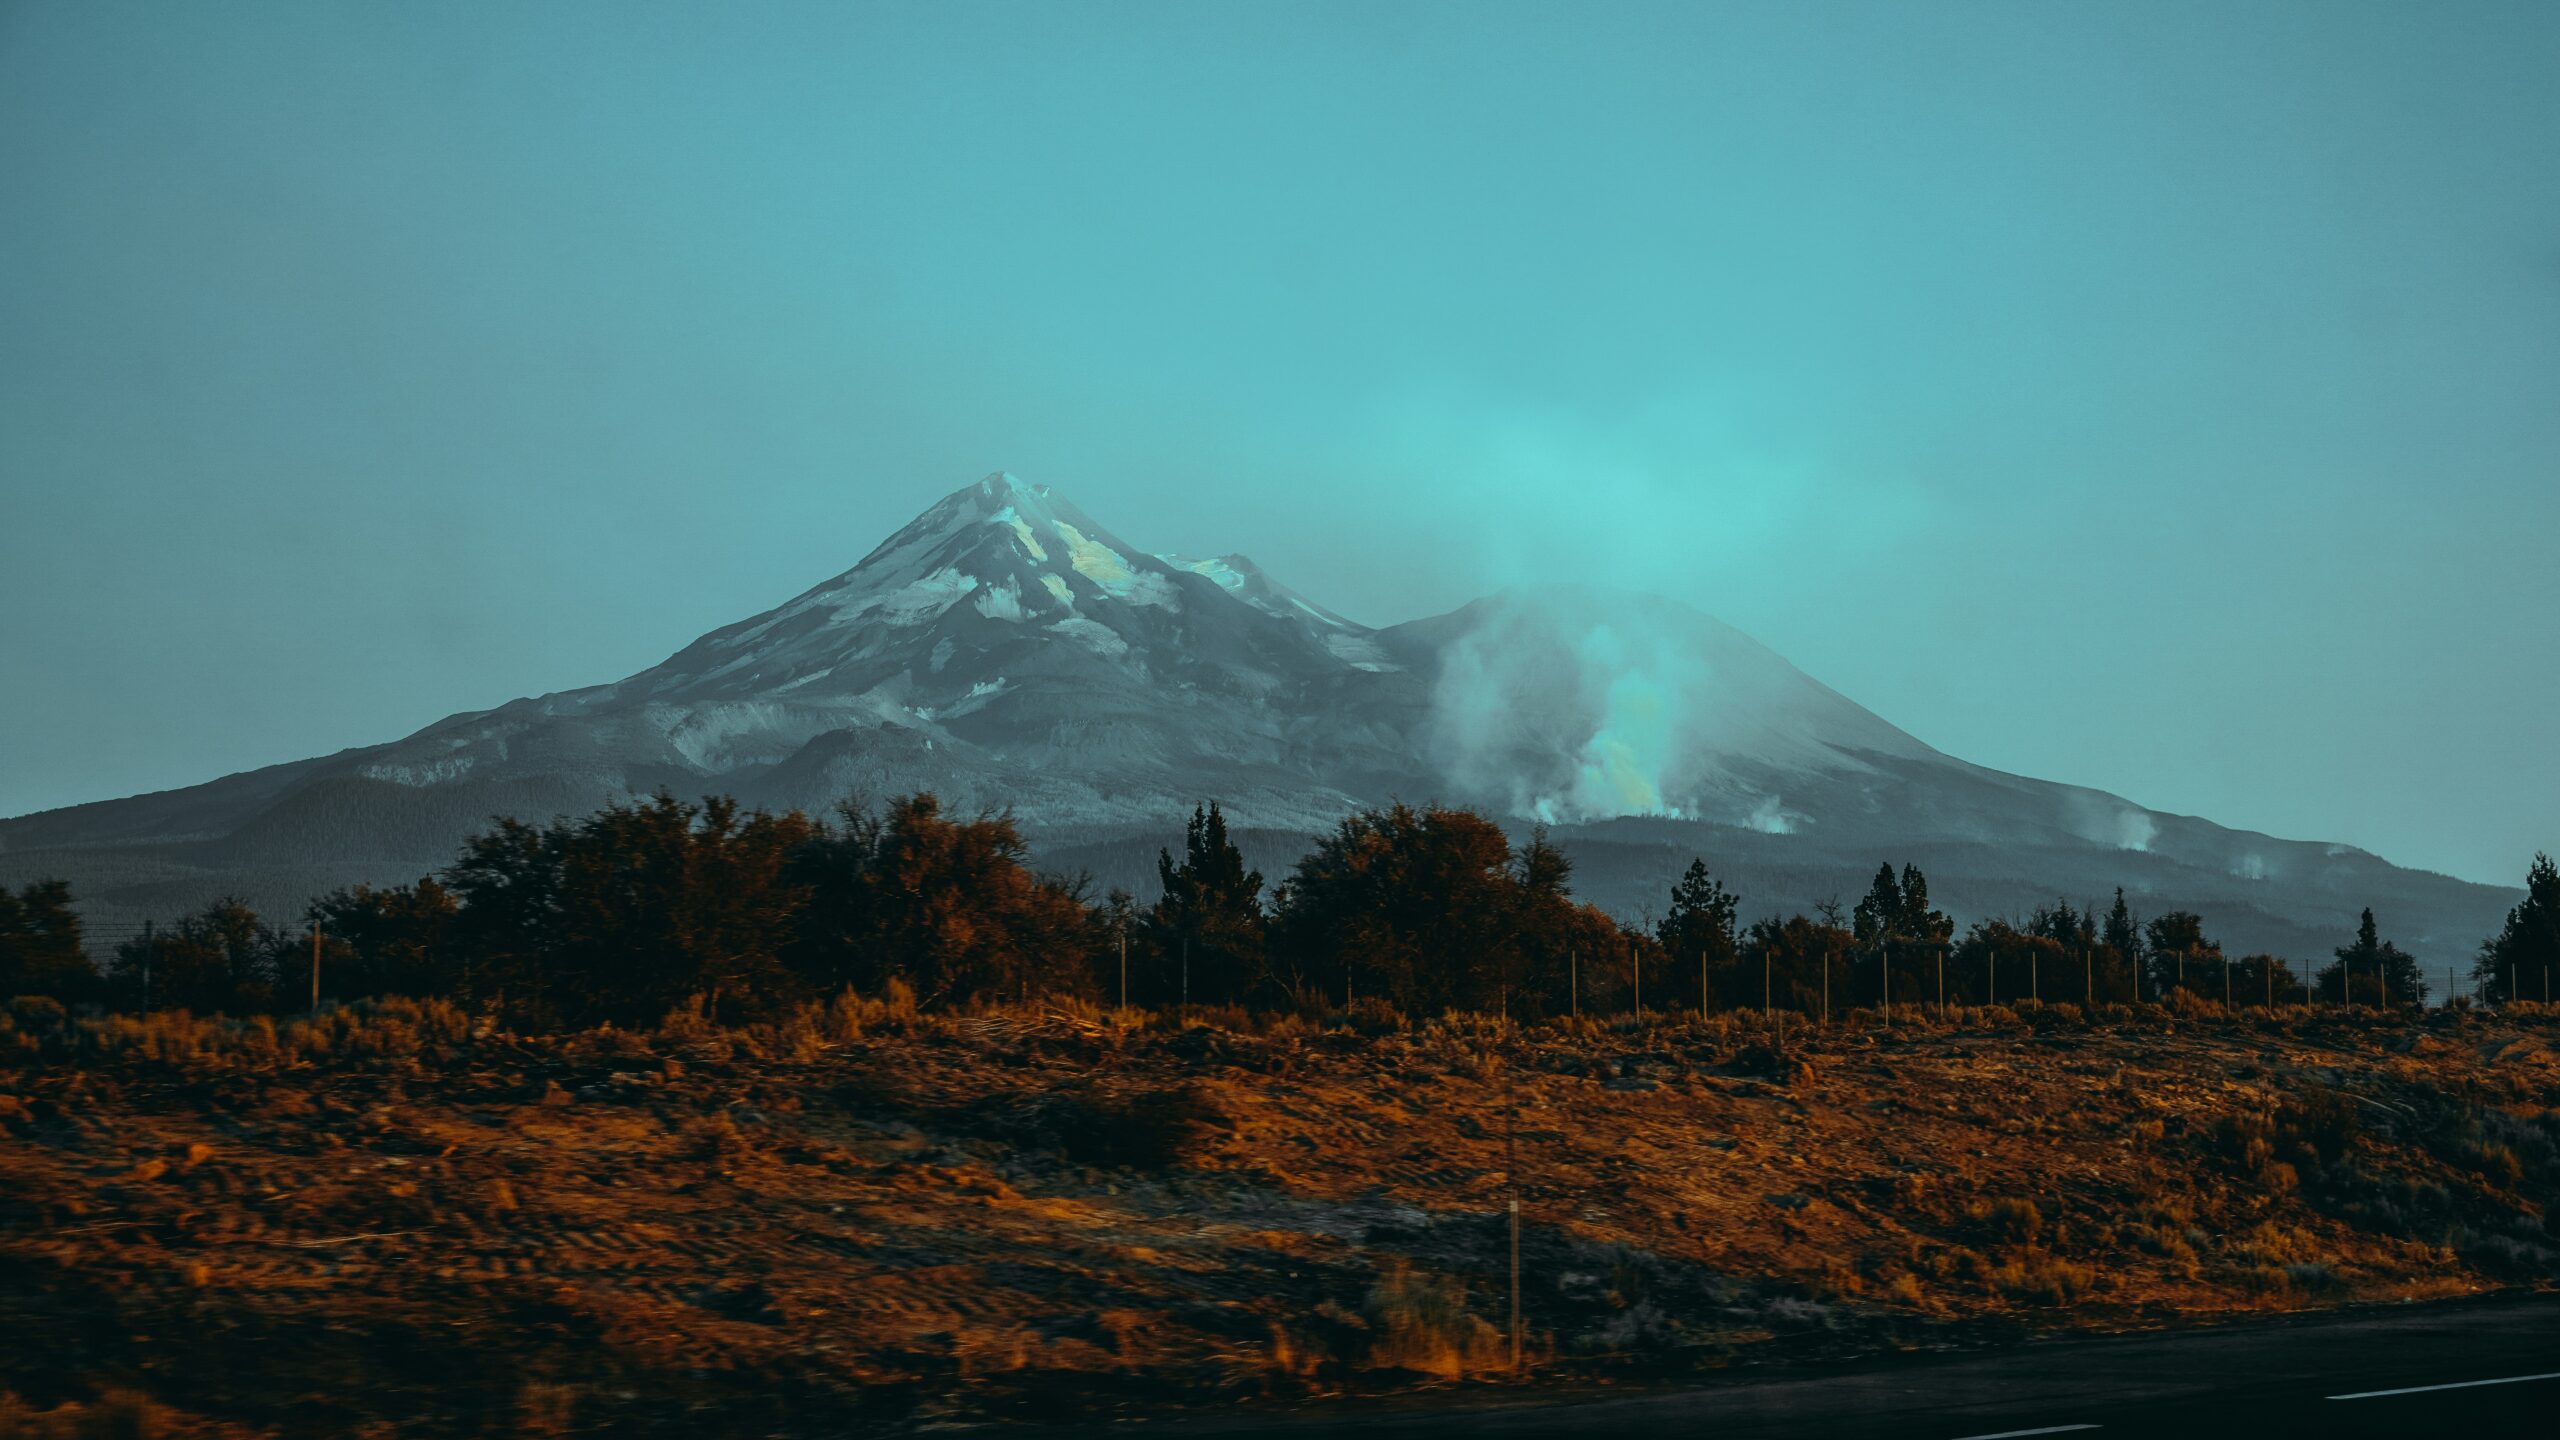 Are There Camping Facilities Near Mount Shasta?